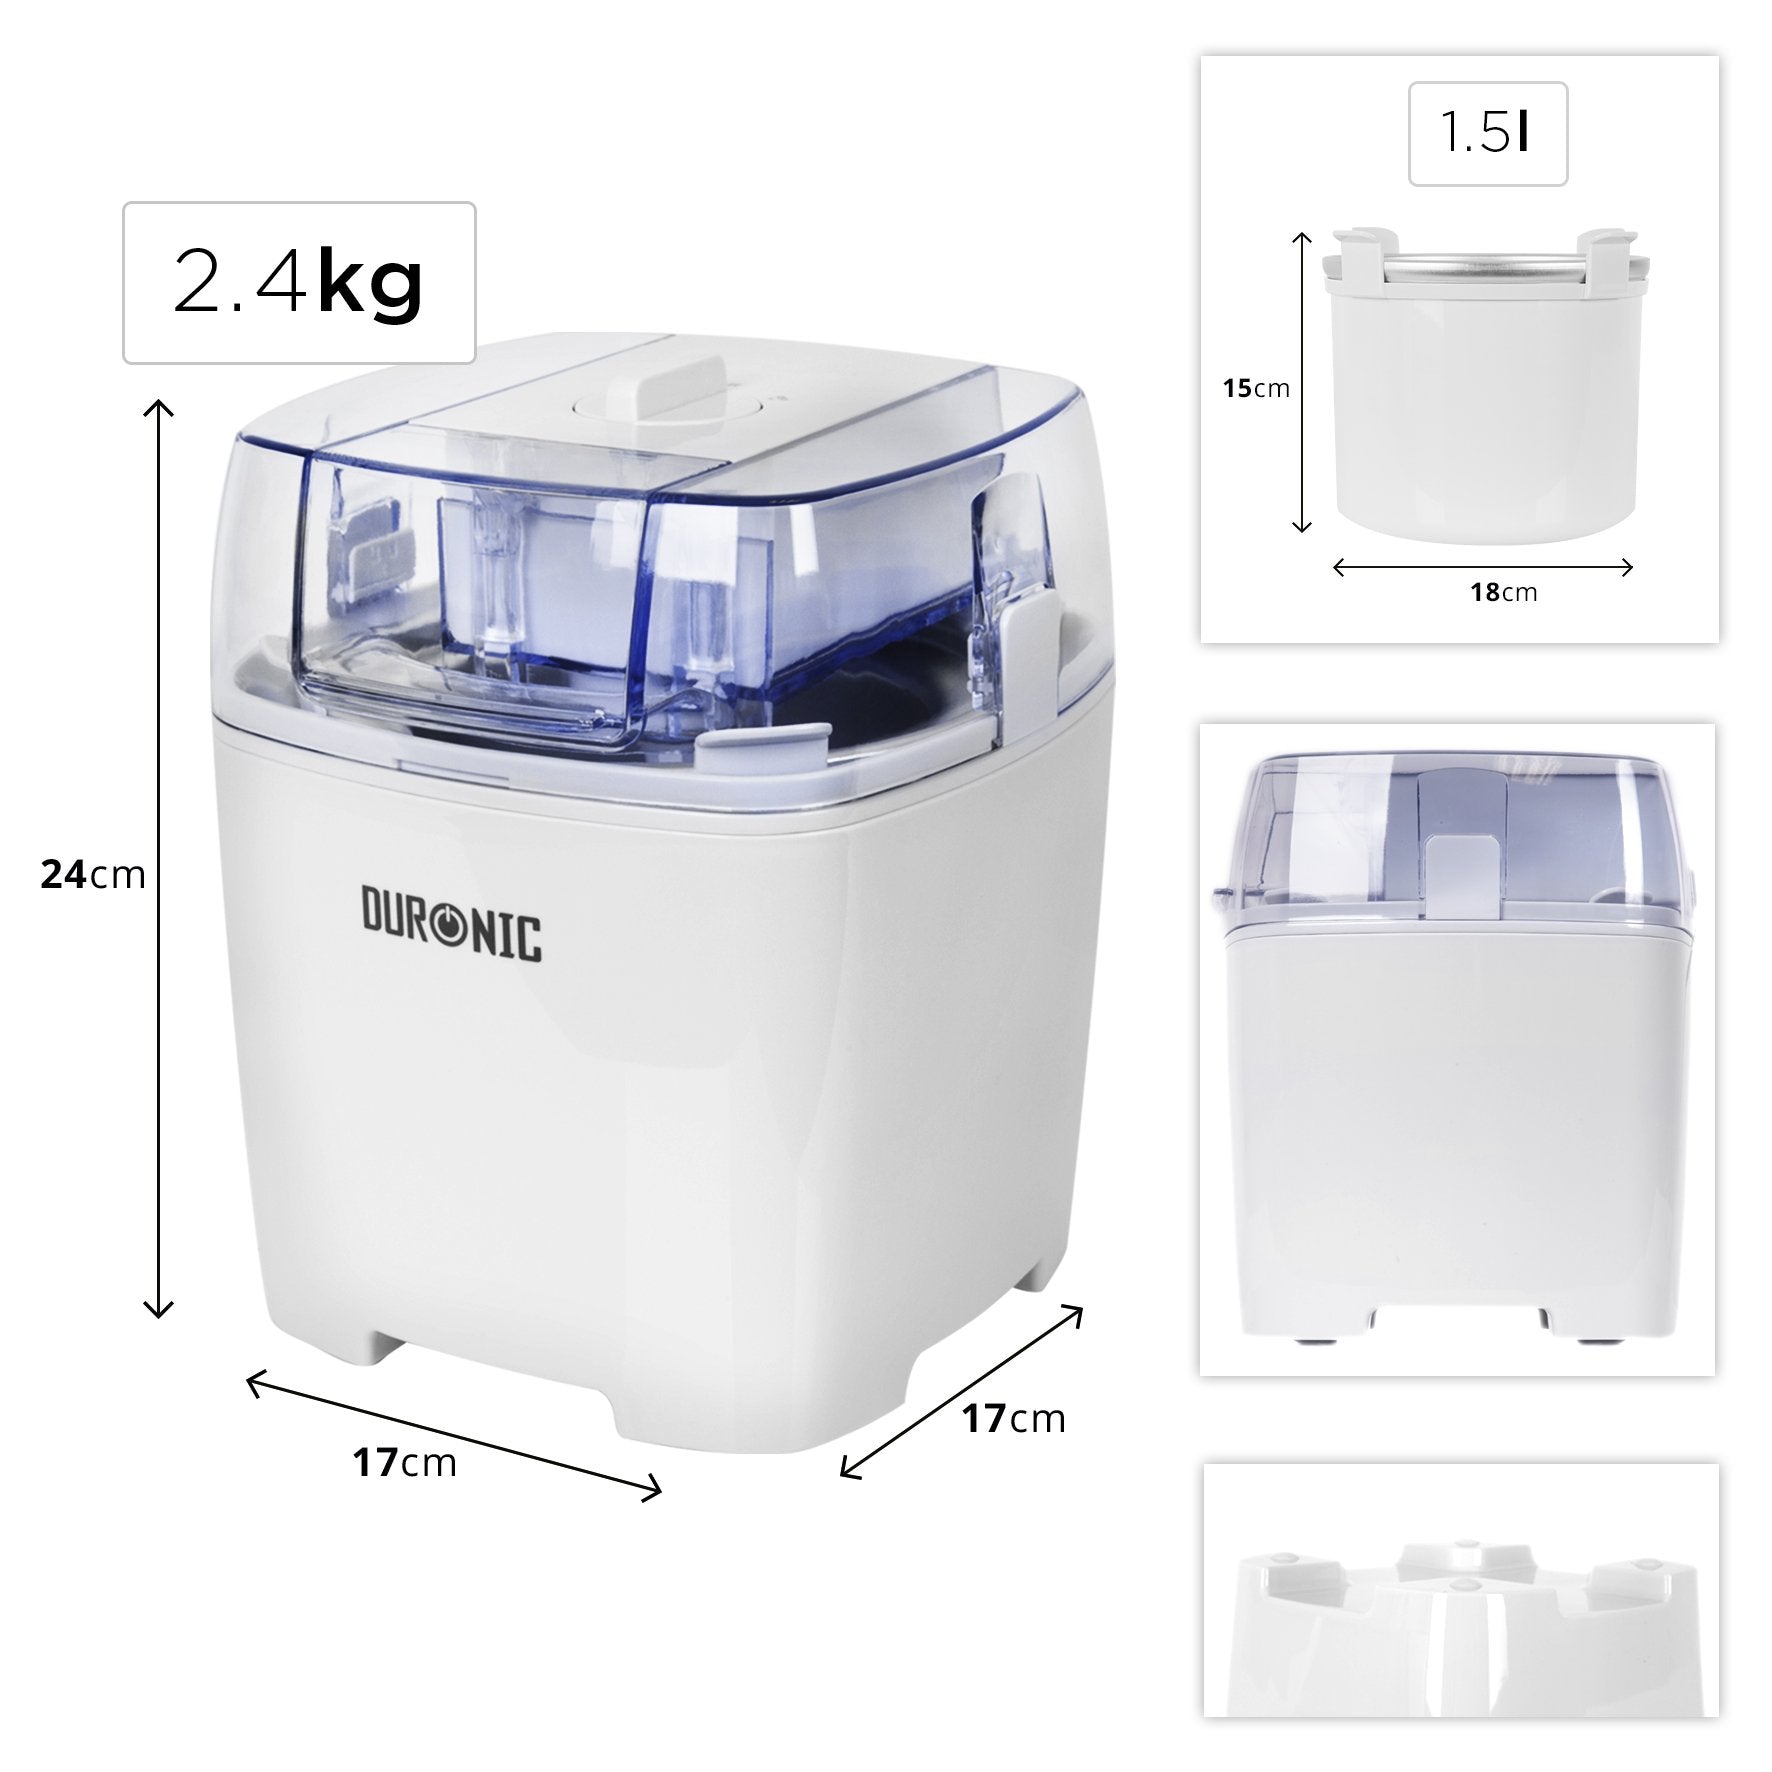 Duronic Ice Cream Maker IM540 Machine, Gelato, Sorbet, Frozen Yoghurt, Soft-Serve Dessert, 1.5L Bowl to Freeze for 8 Hours, Electric Churning, Compact Portable Design, Make Homemade Delicious Creamy Ice Cream in 30 Minutes with your Kids!